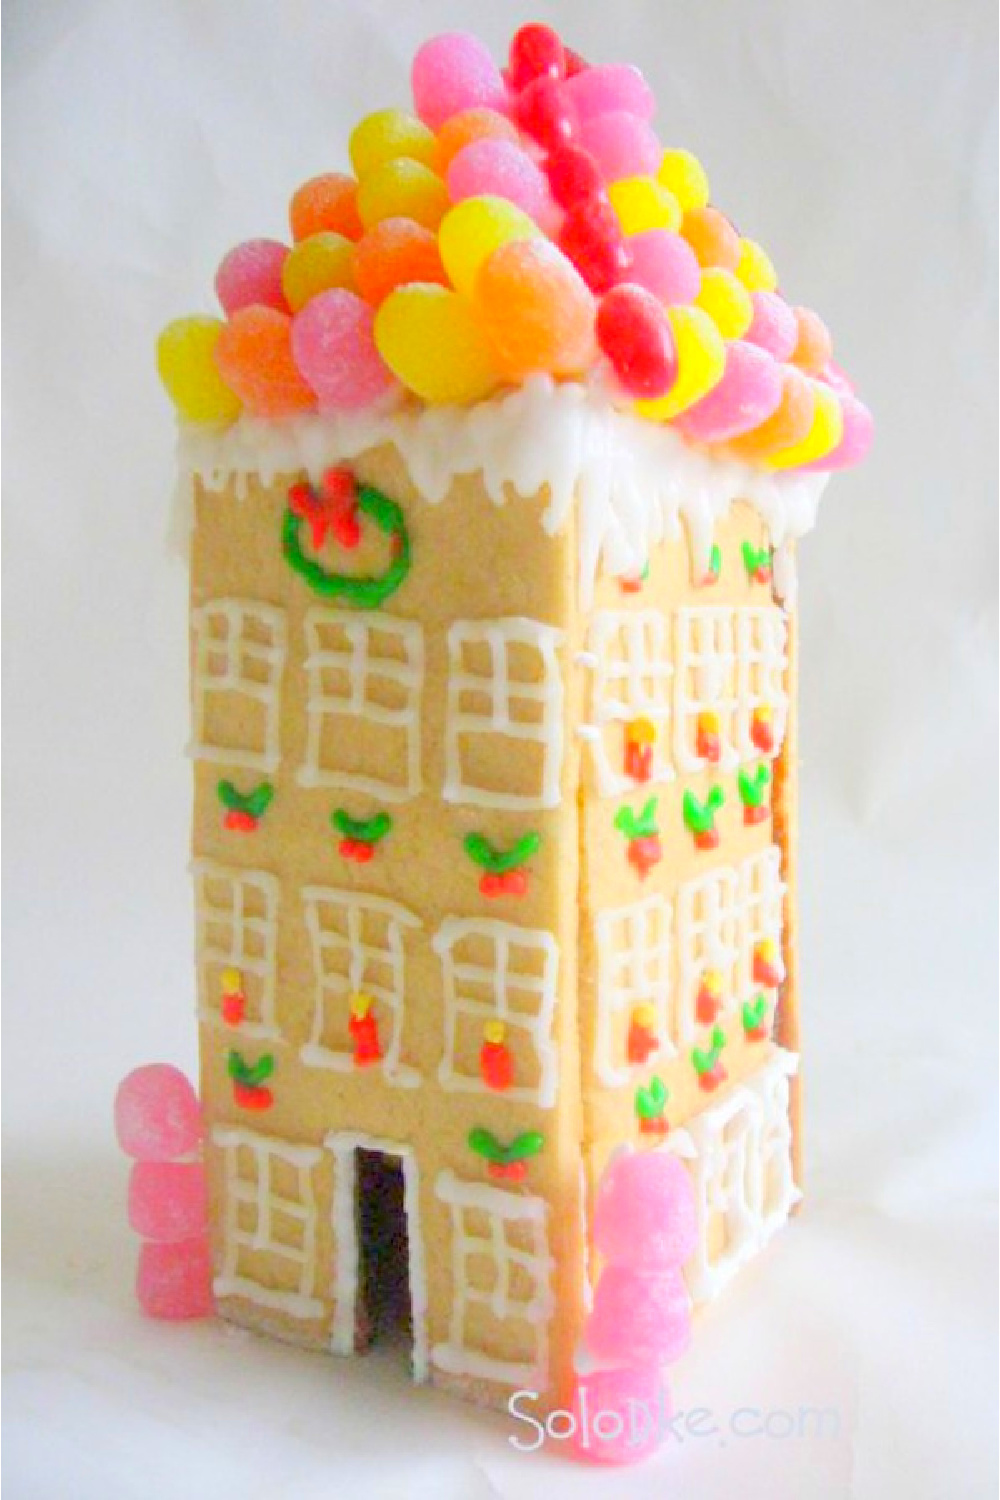 Magnificent sugar cookie townhouse with fanciful gumdrop decorated roof! Solodke. #gingerbreadhouse #candyhouse #gumdrops #holidaydiy